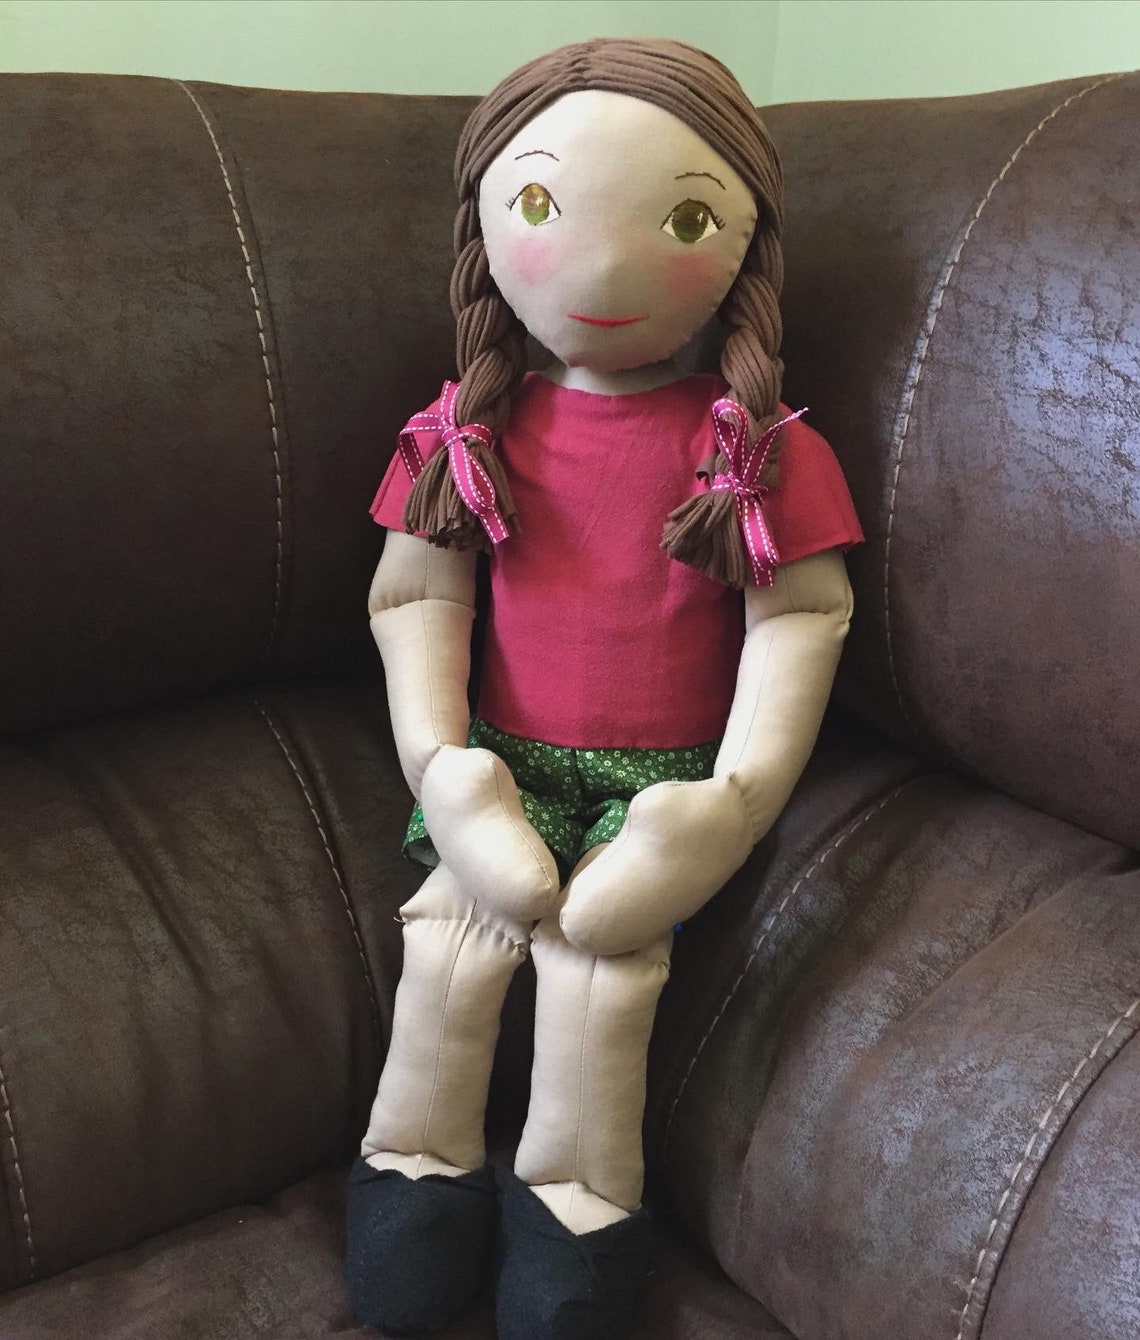 25 Inch Physical Therapy Doll Ndt Therapy Doll Jointed Doll Large Doll Ethnic Doll